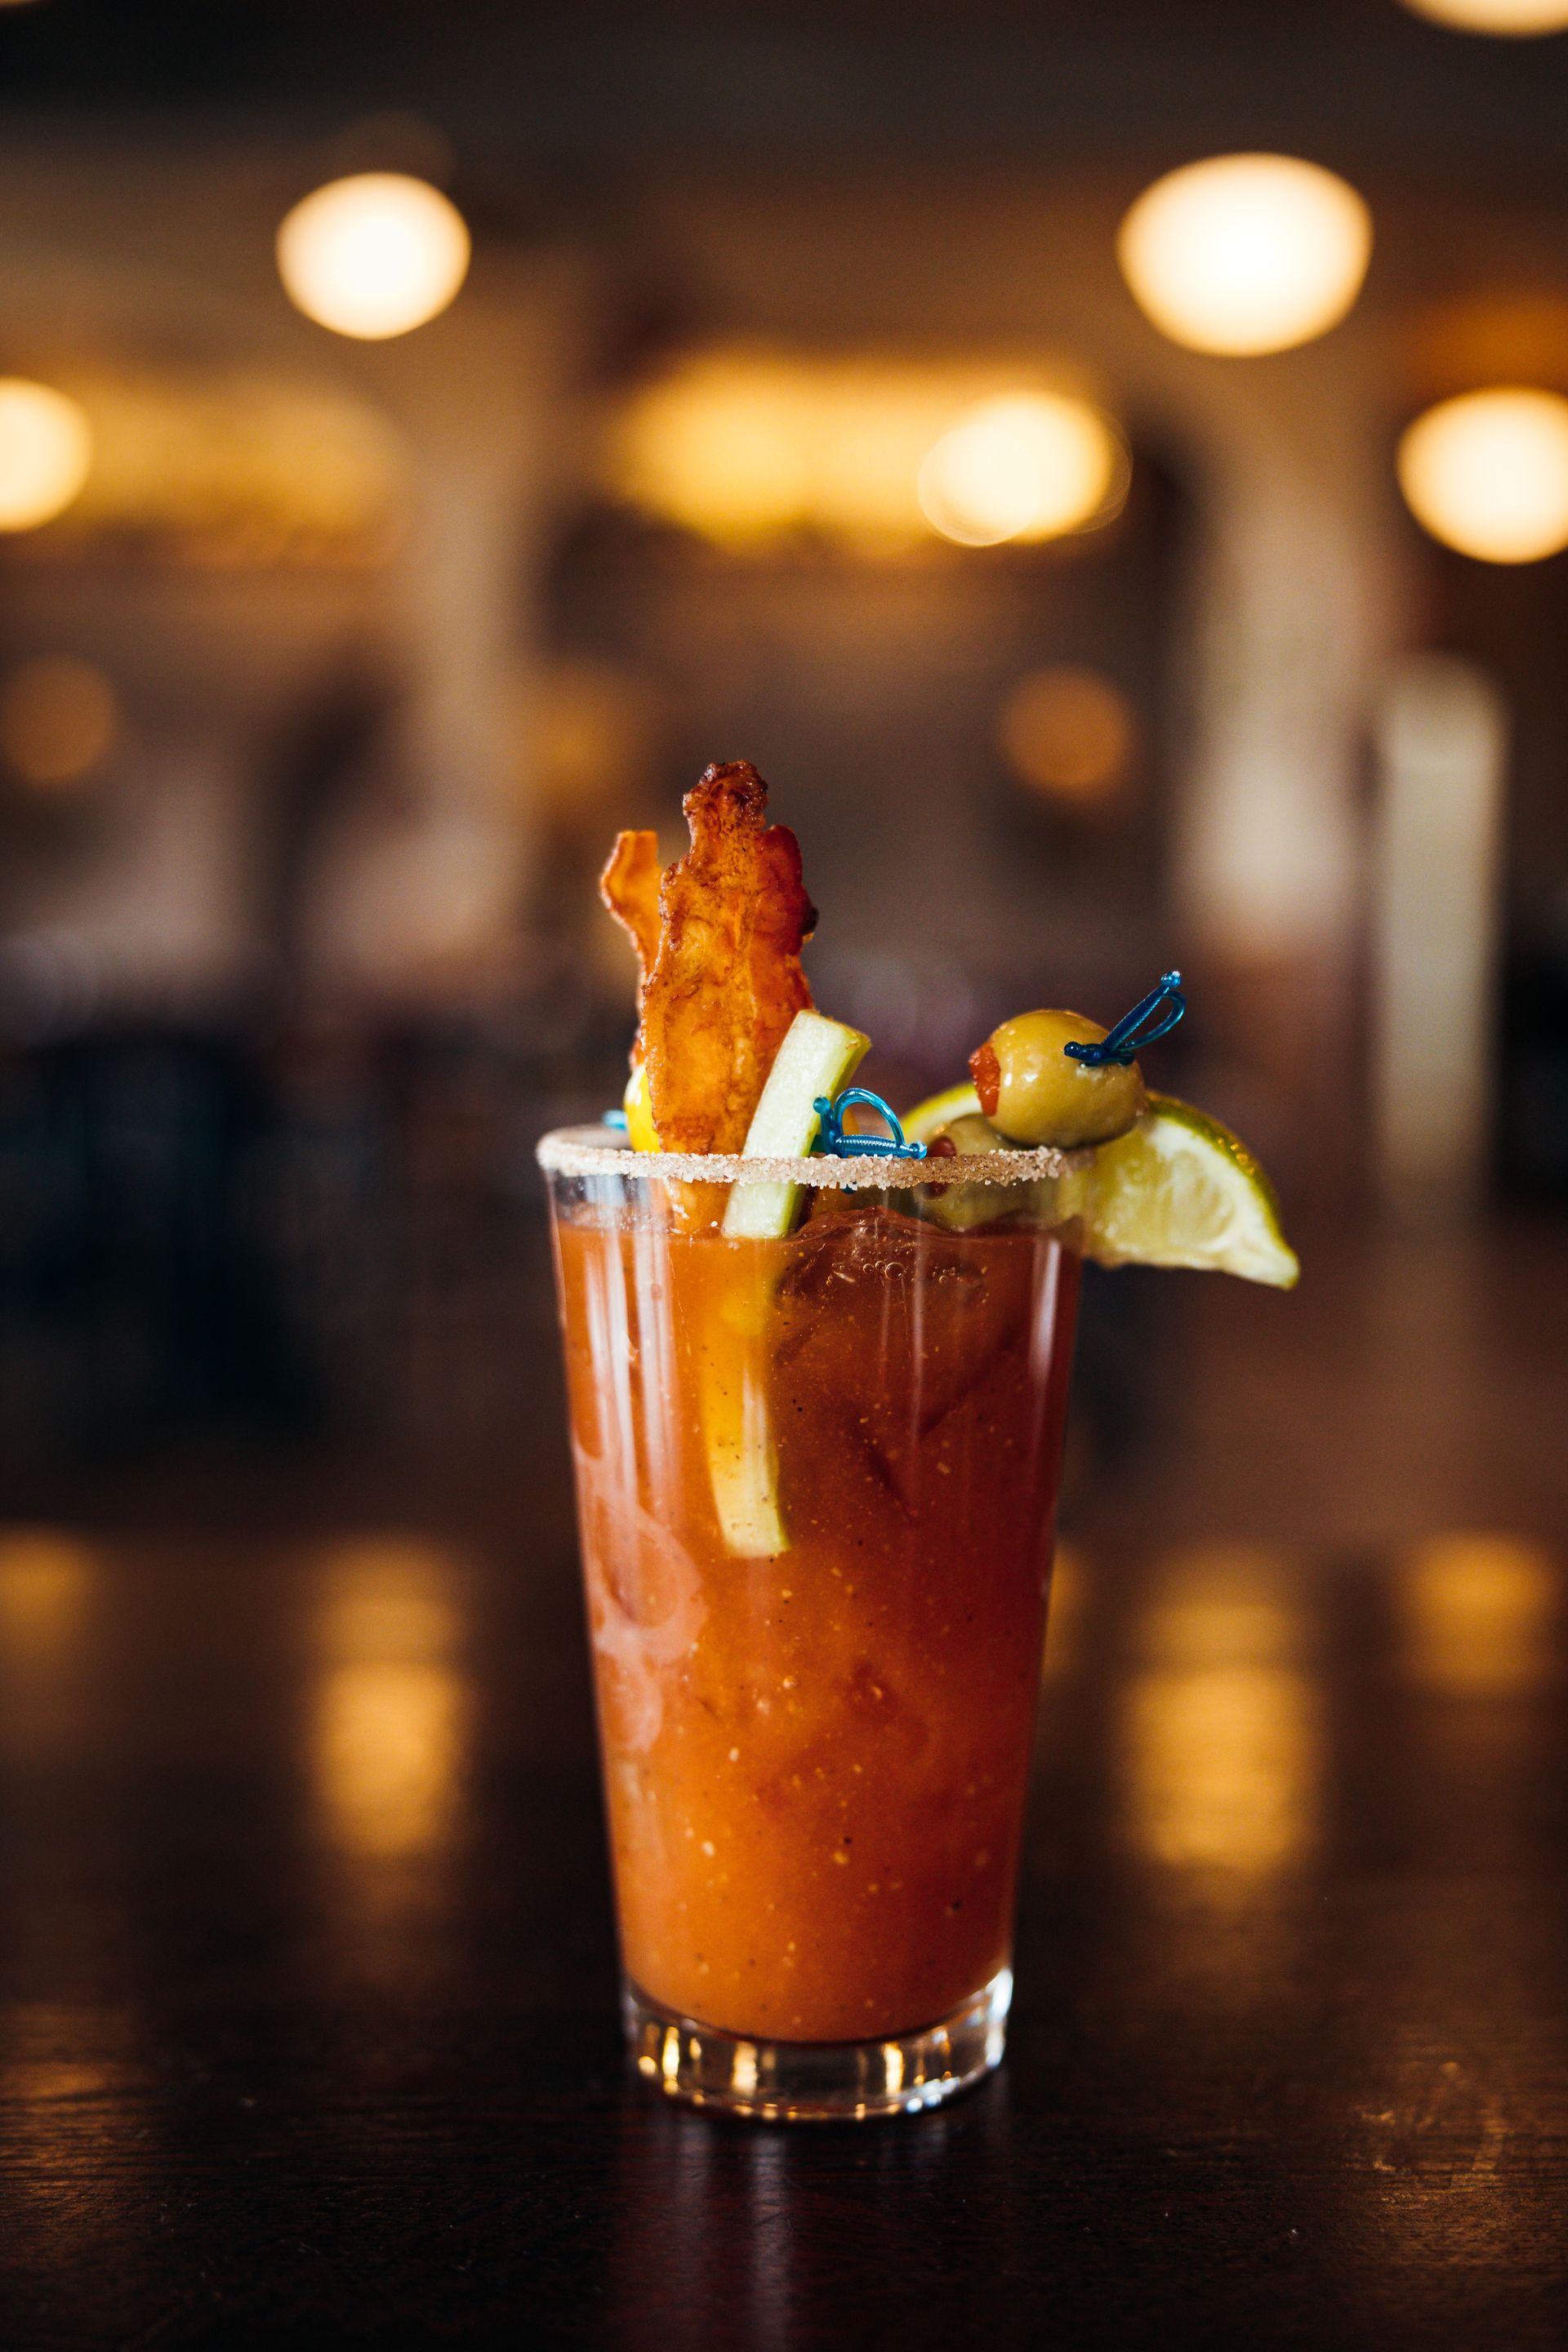 The Hill Serves a Variety of Custom Cocktails Including Our Take on the Classic Bloody Mary.